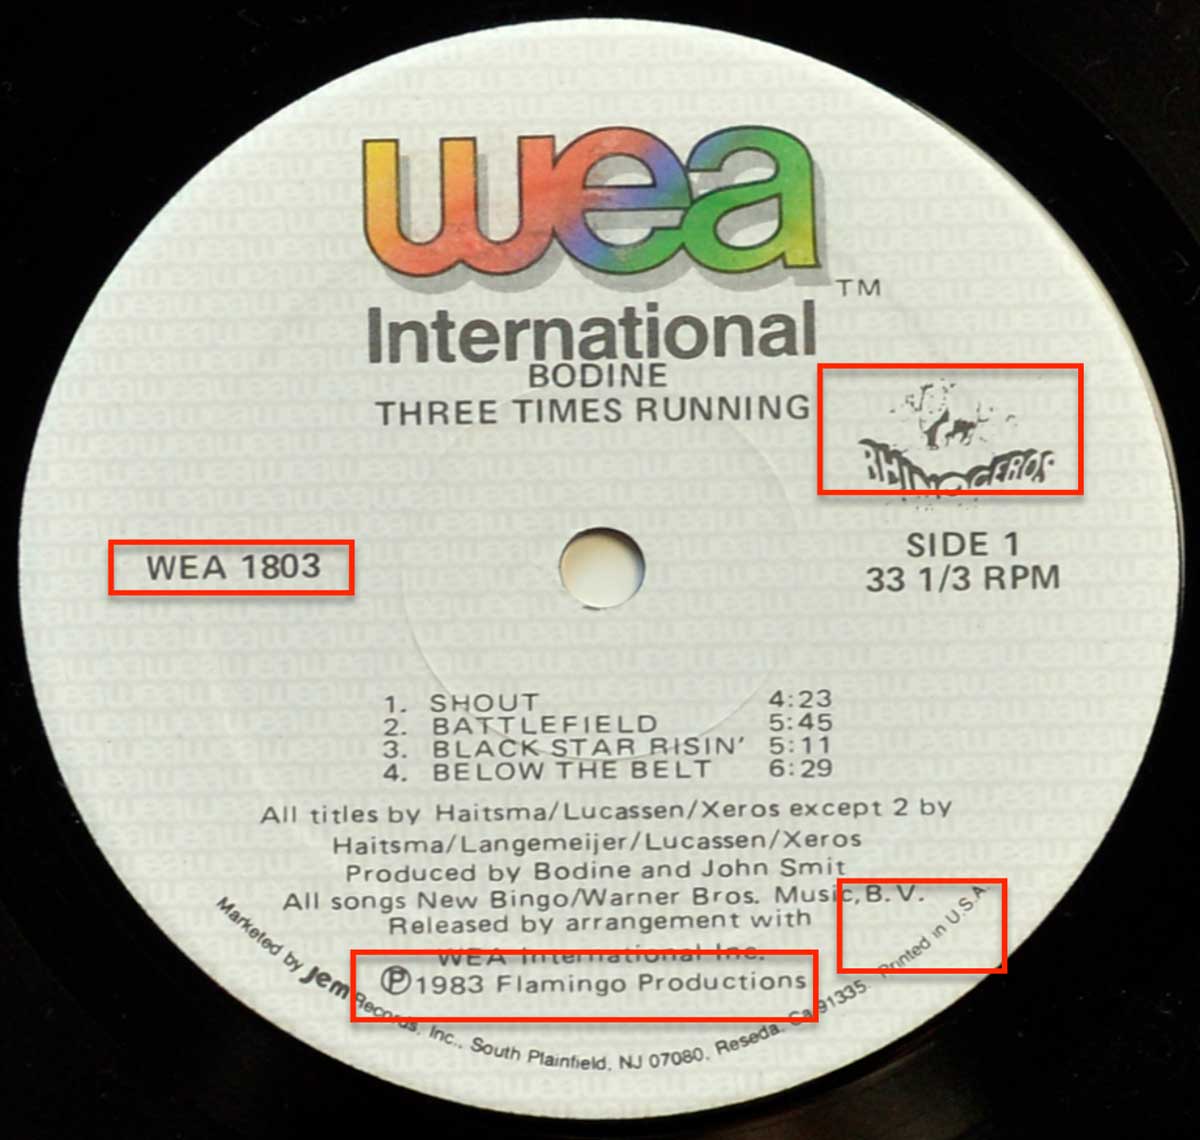 Close up of the White WEA International record's label 